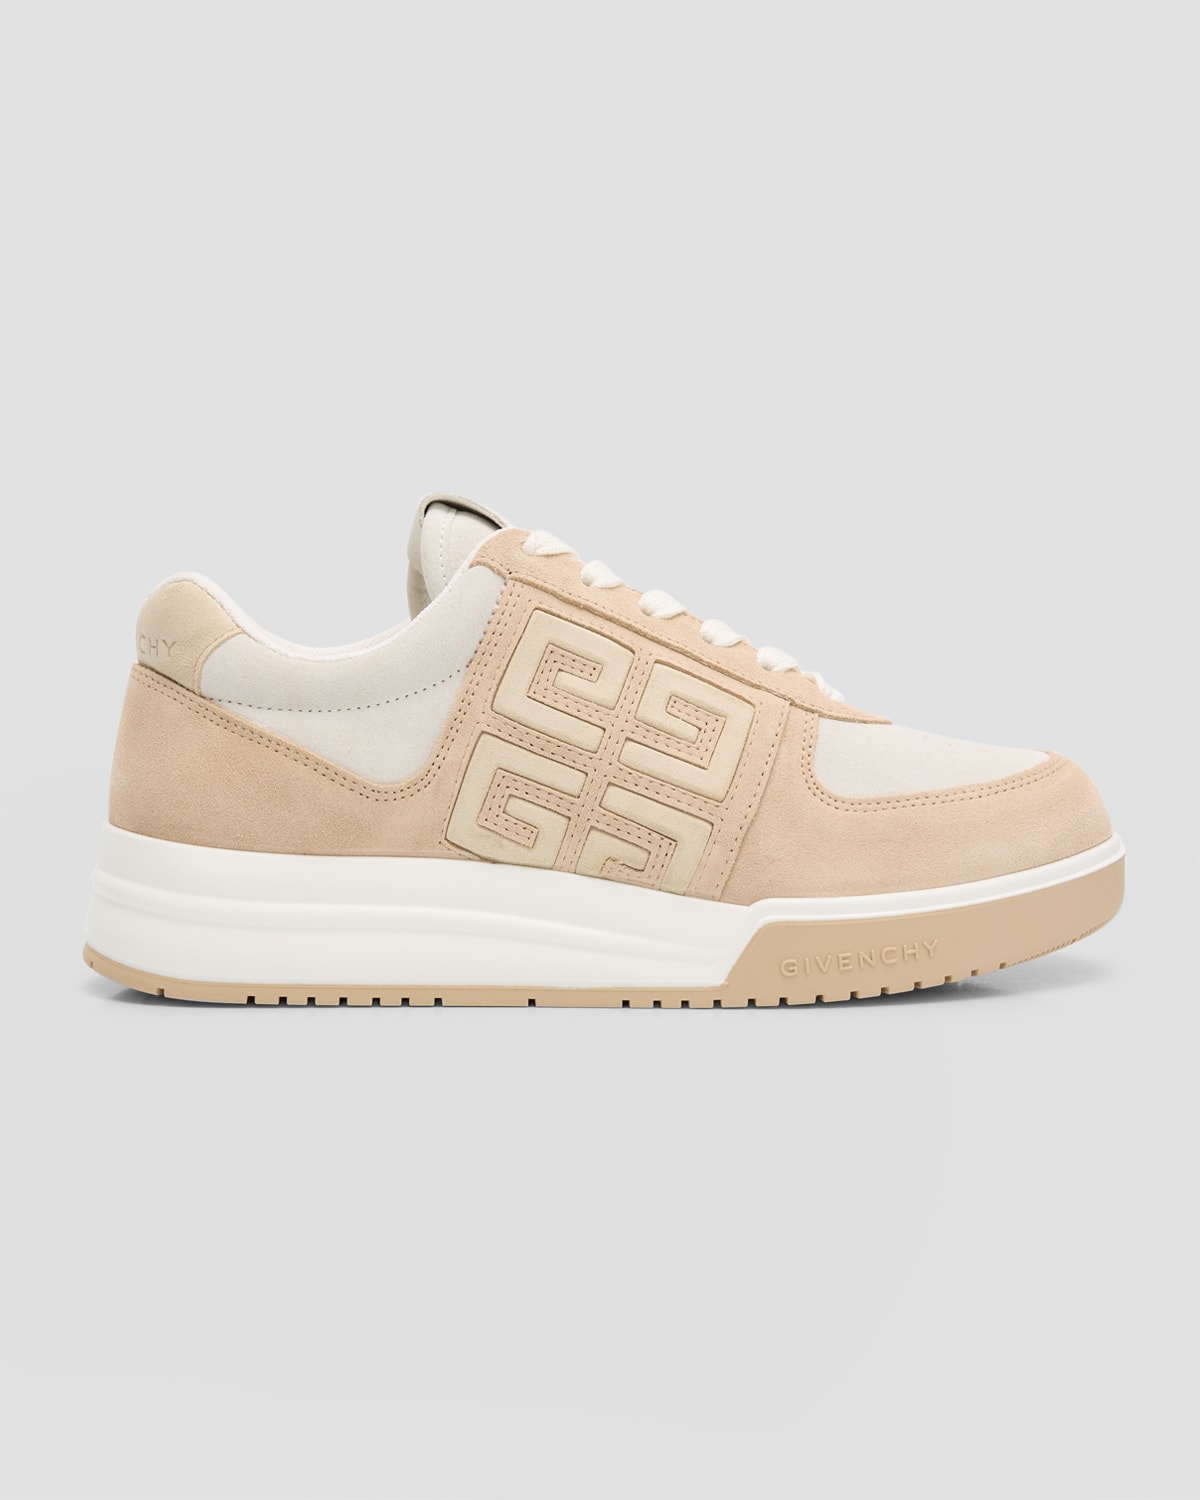 Givenchy 4g Mixed Leather Low-top Sneakers In Beige White